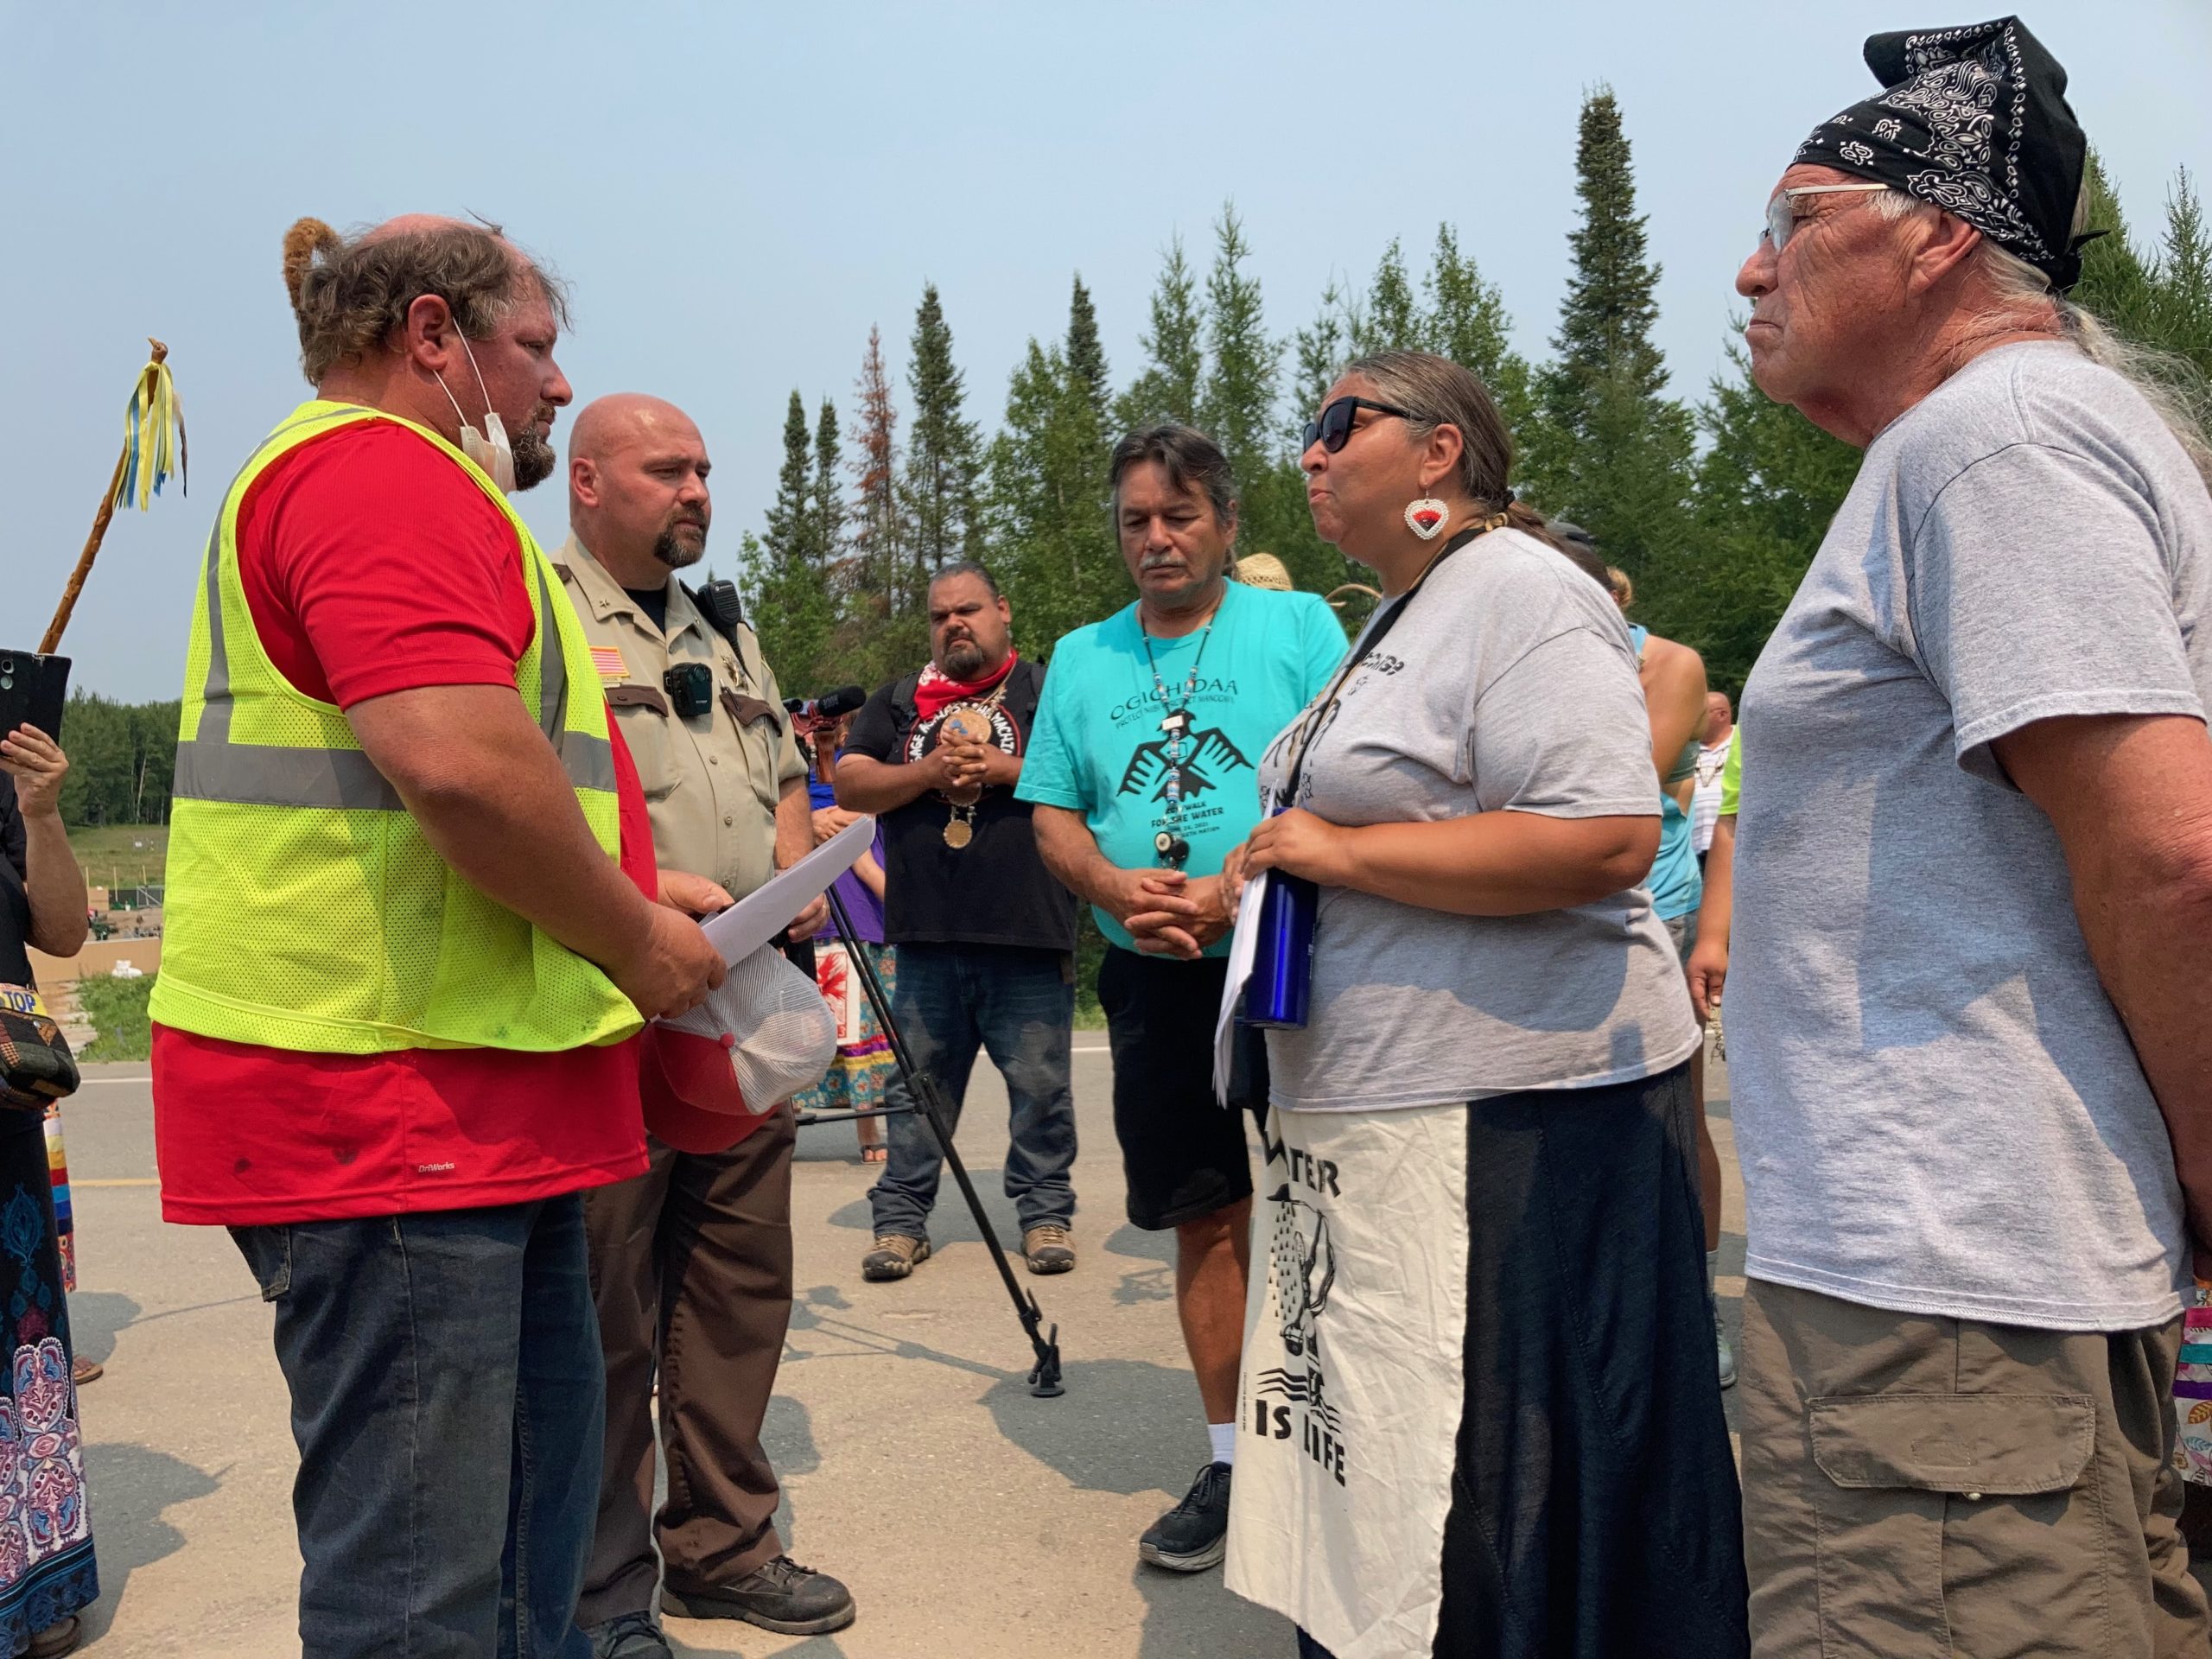 White Earth Tribal member and RISE Coalition co-founder Dawn Goodwin (second from right) serves an Enbridge representative with a cease-and-desist order for work on Line 3 under the Mississippi River. Clearwater County Sheriff Darin Halverson (second from left) flanks the representative while White Earth Tribal Council member Raymond Auginaush, Sr. (center) accompanies Dawn. Dawn and others established Camp Firelight near the headwaters of the Mississippi River at Coffee Pot Landing in Clearwater County, where Enbridge had set up pumping and drilling stations to bore under the river. Pipeline 3 or 5 is set to travel under the river, a cause for concern as it violates the sovereignty of Ojibwe people in the 1855 Treaty Territory XYZ and could pollute water for 20 million people who live downstream when the pipeline leaks. Pipeline leaks are common in the United States.